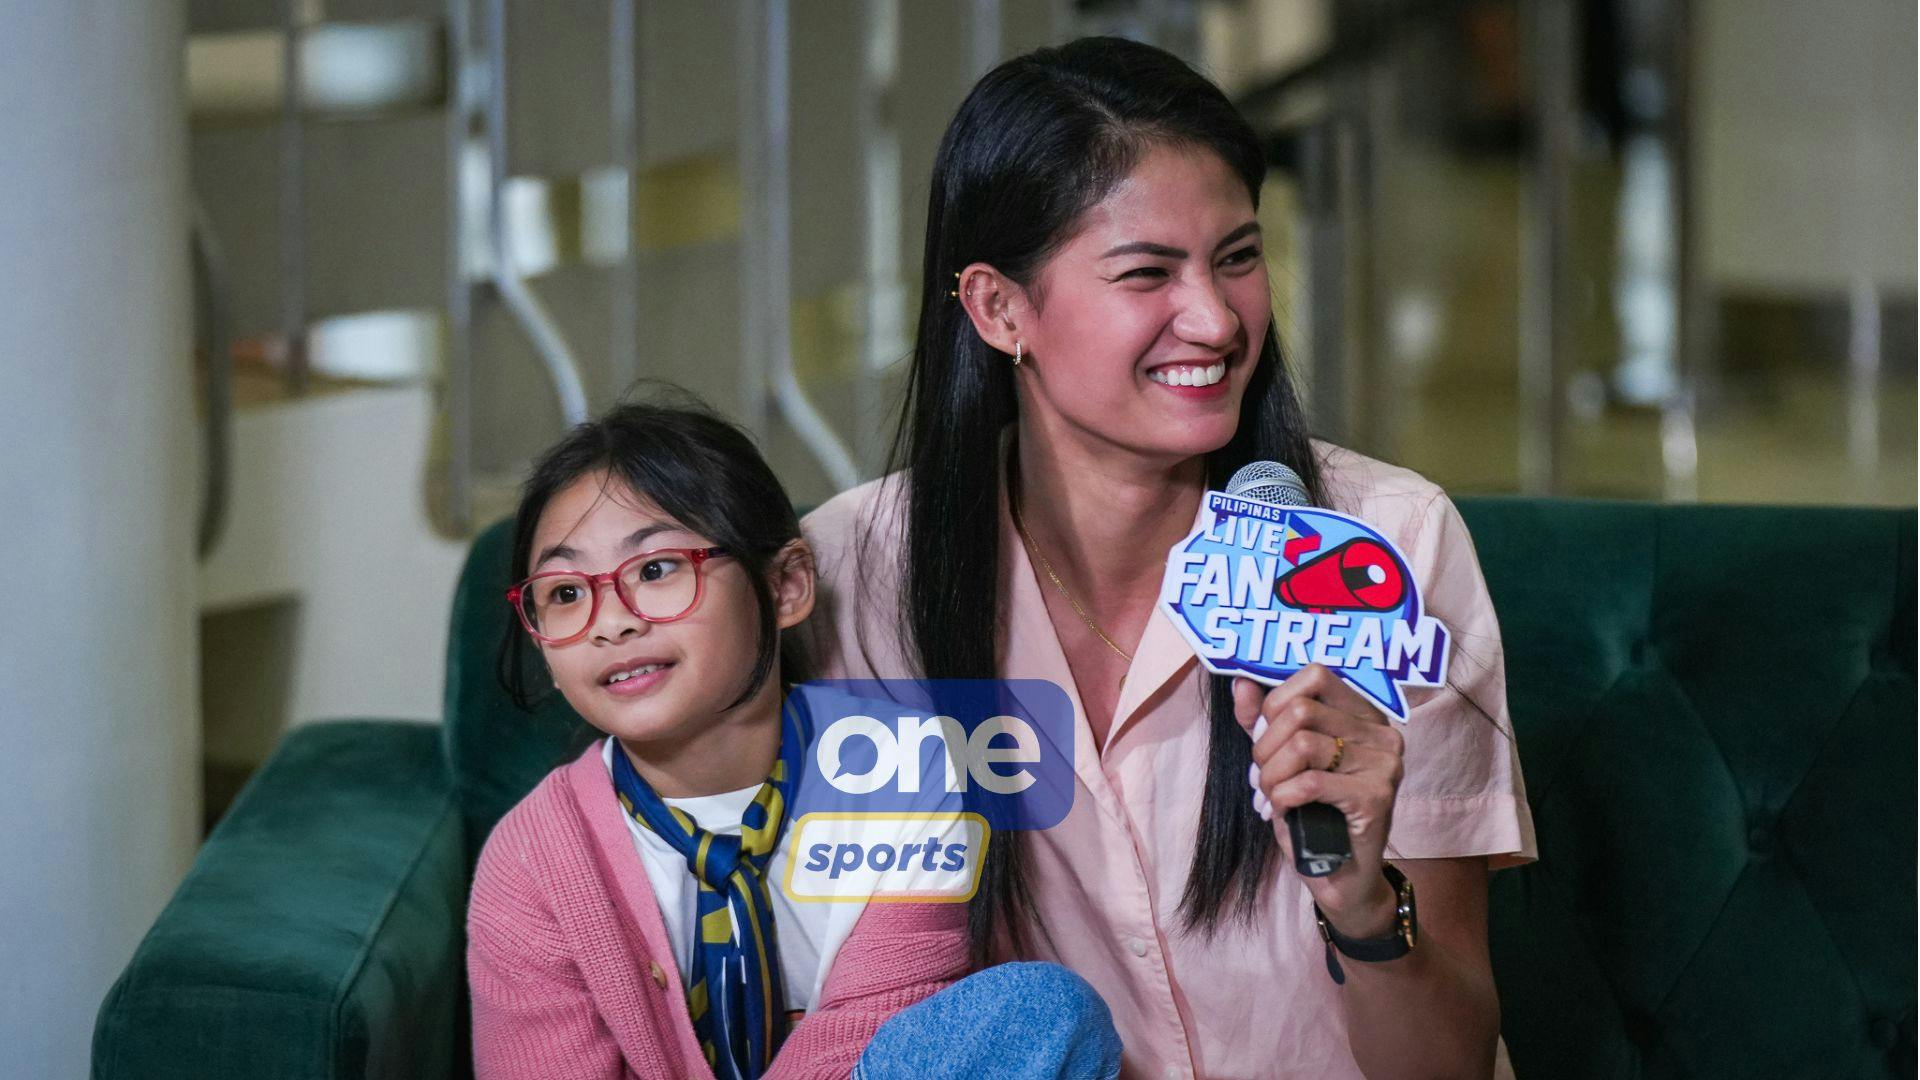 UAAP: Season 72 champion Dindin Santiago-Manabat at crossroads in supporting UST, NU in Finals